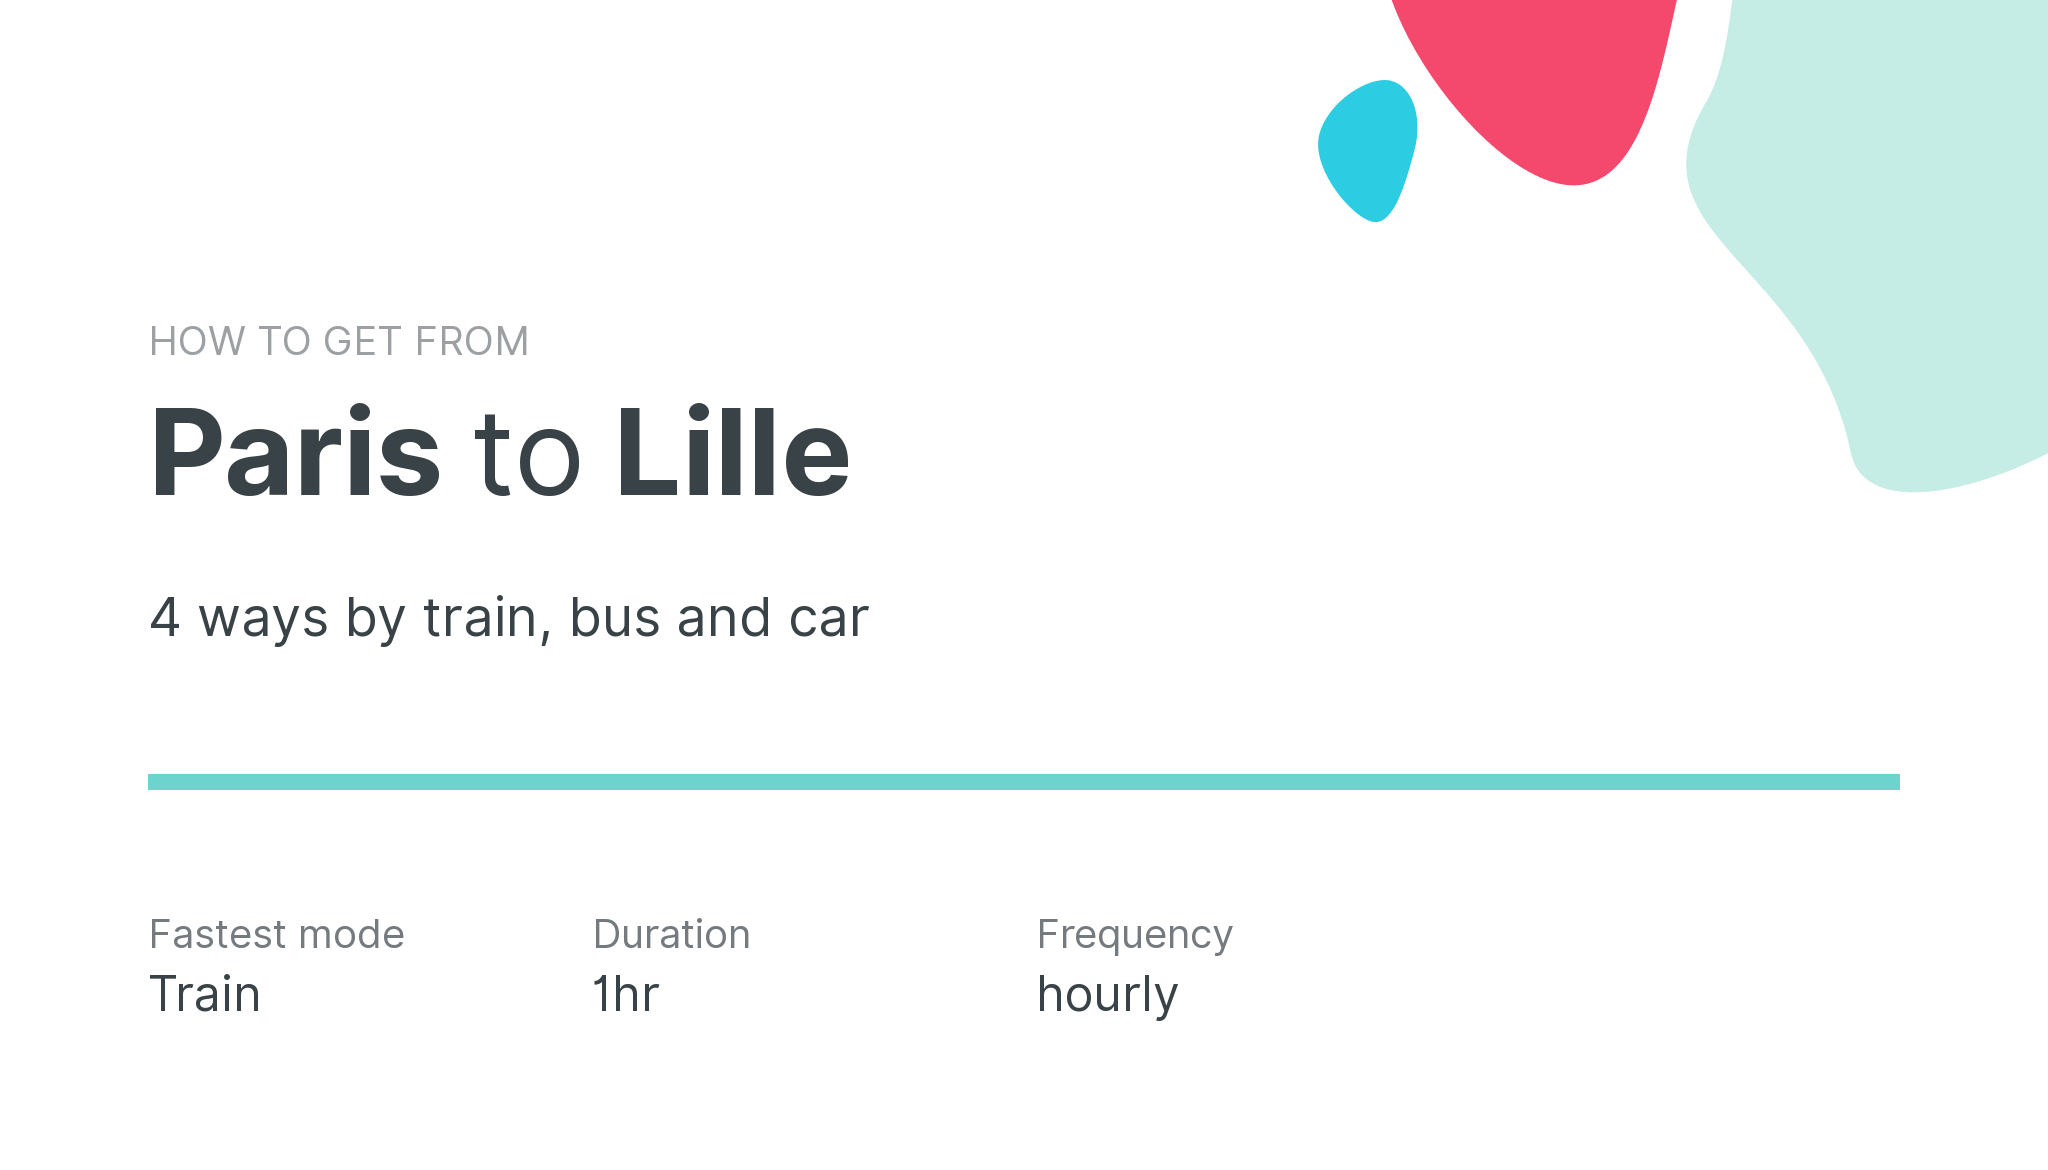 How do I get from Paris to Lille